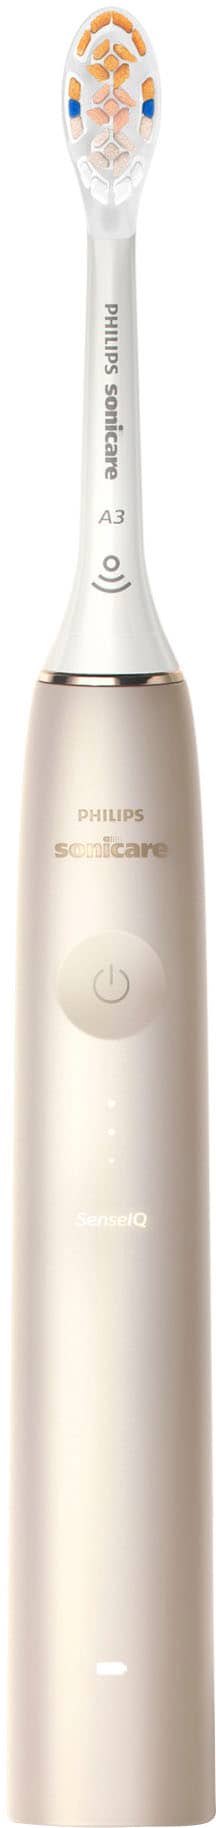 Philips Sonicare 9900 Prestige Rechargeable Electric Toothbrush with SenseIQ - Champagne_16